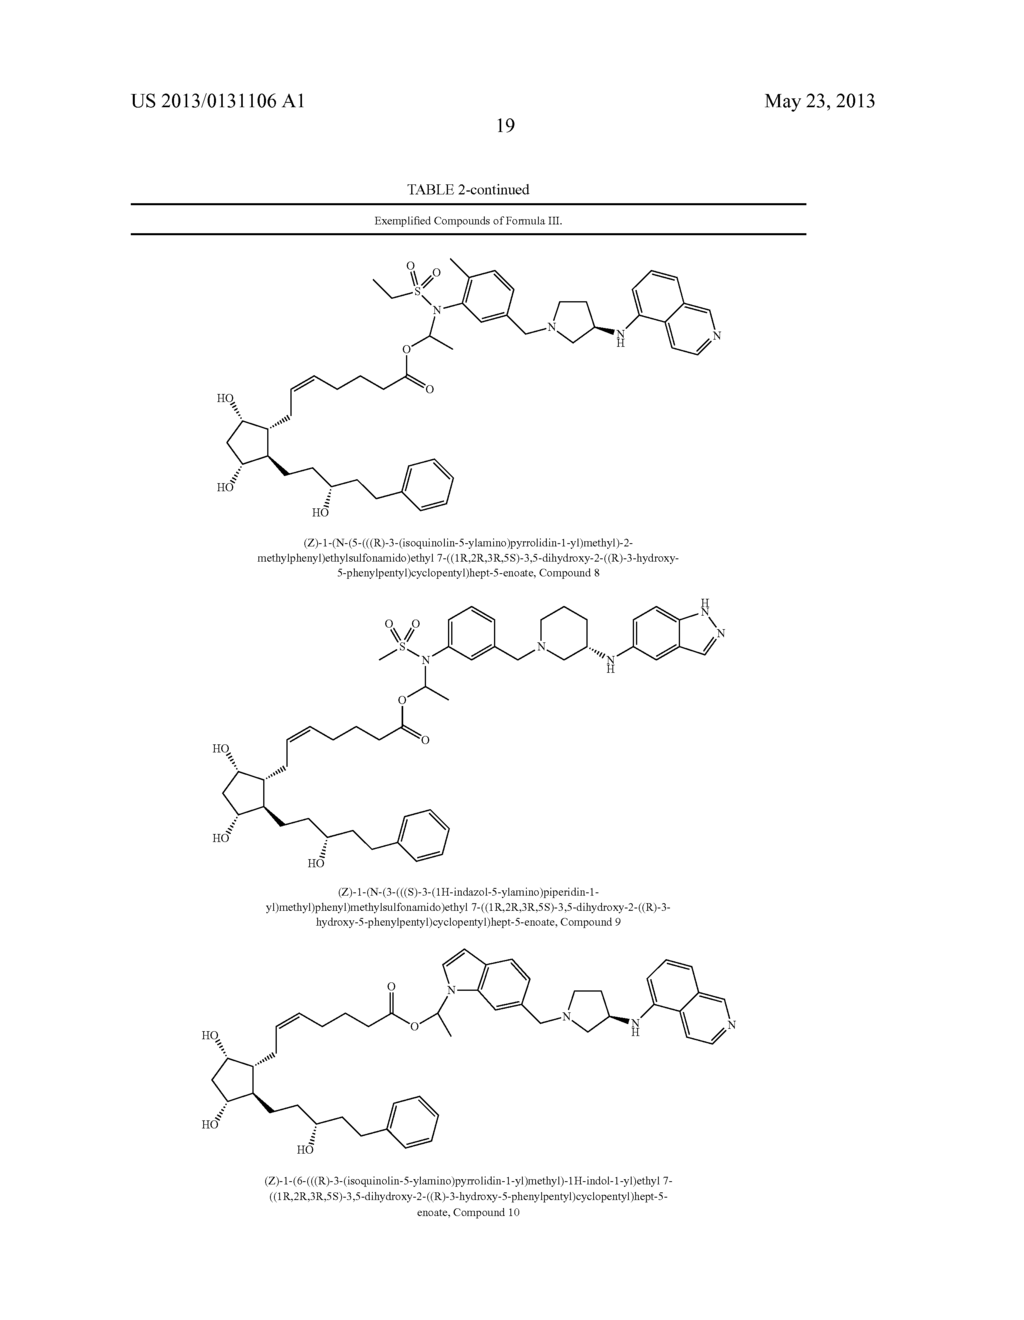 BIFUNCTIONAL RHO KINASE INHIBITOR COMPOUNDS, COMPOSITION AND USE - diagram, schematic, and image 20